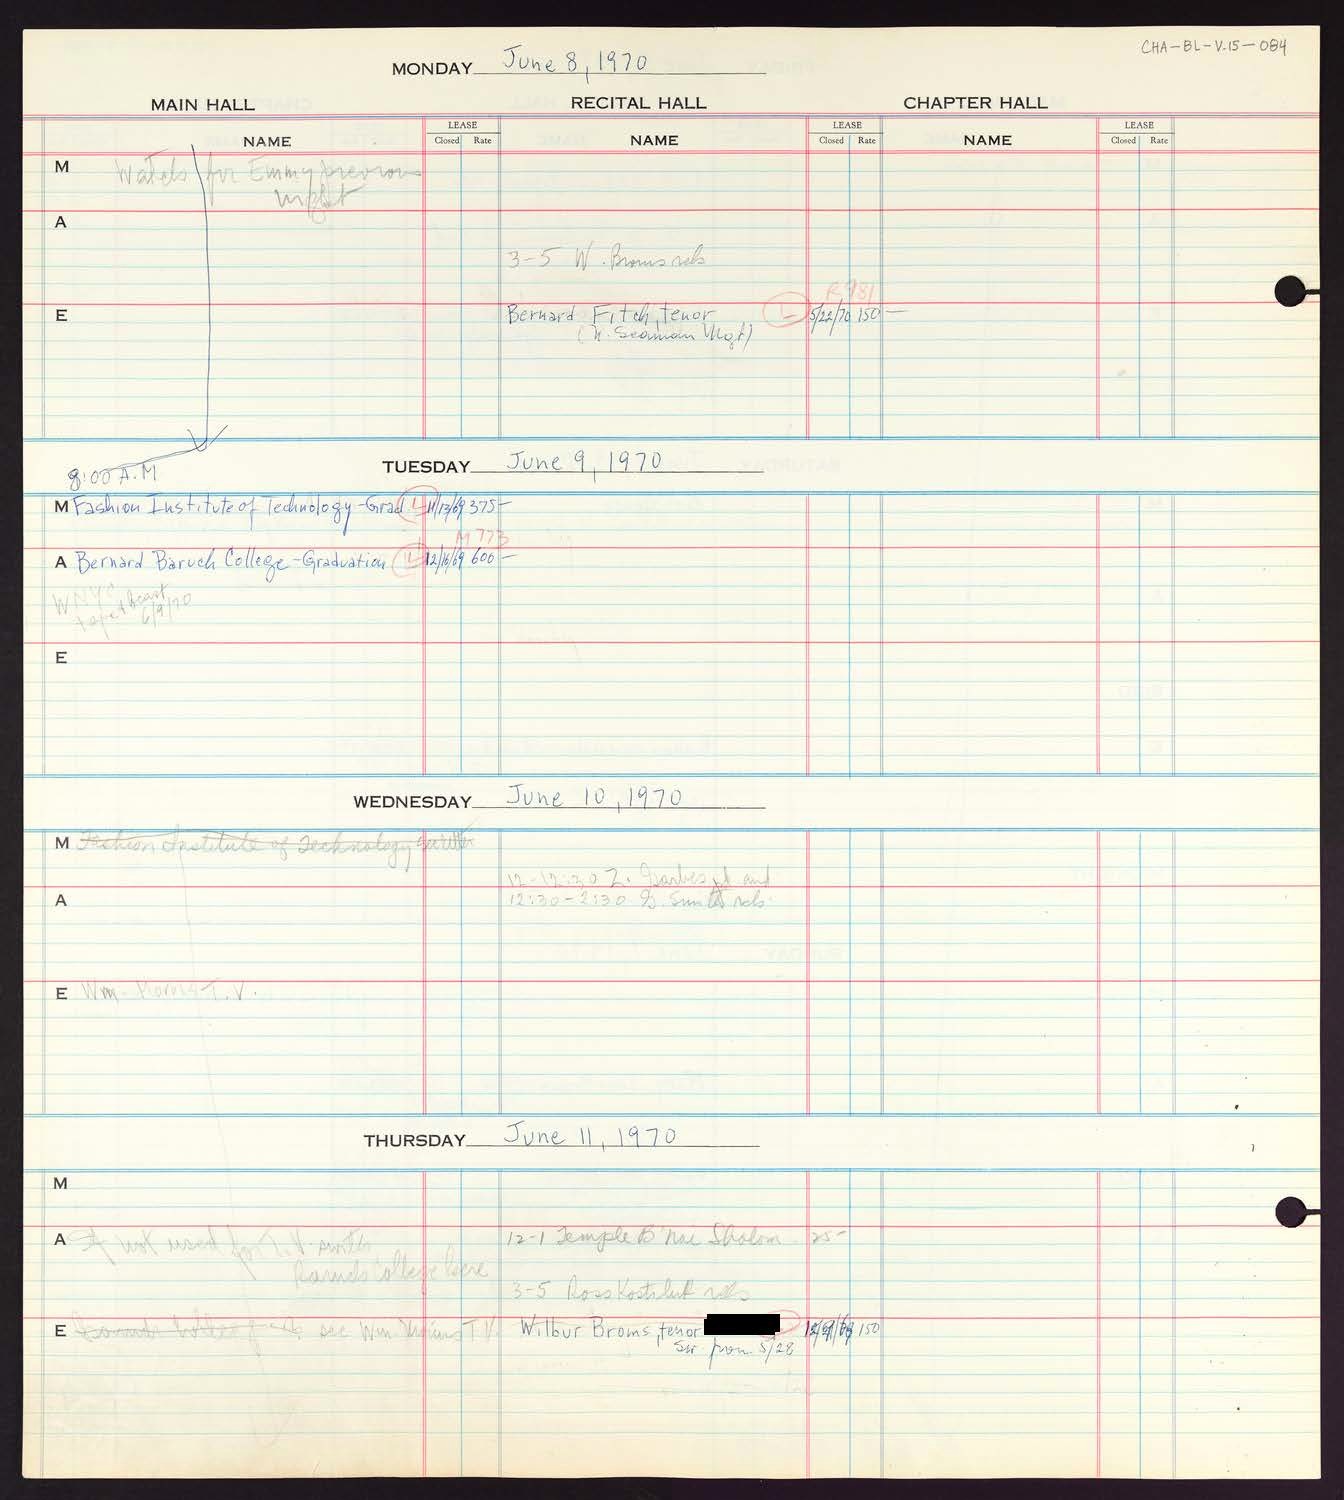 Carnegie Hall Booking Ledger, volume 15, page 84